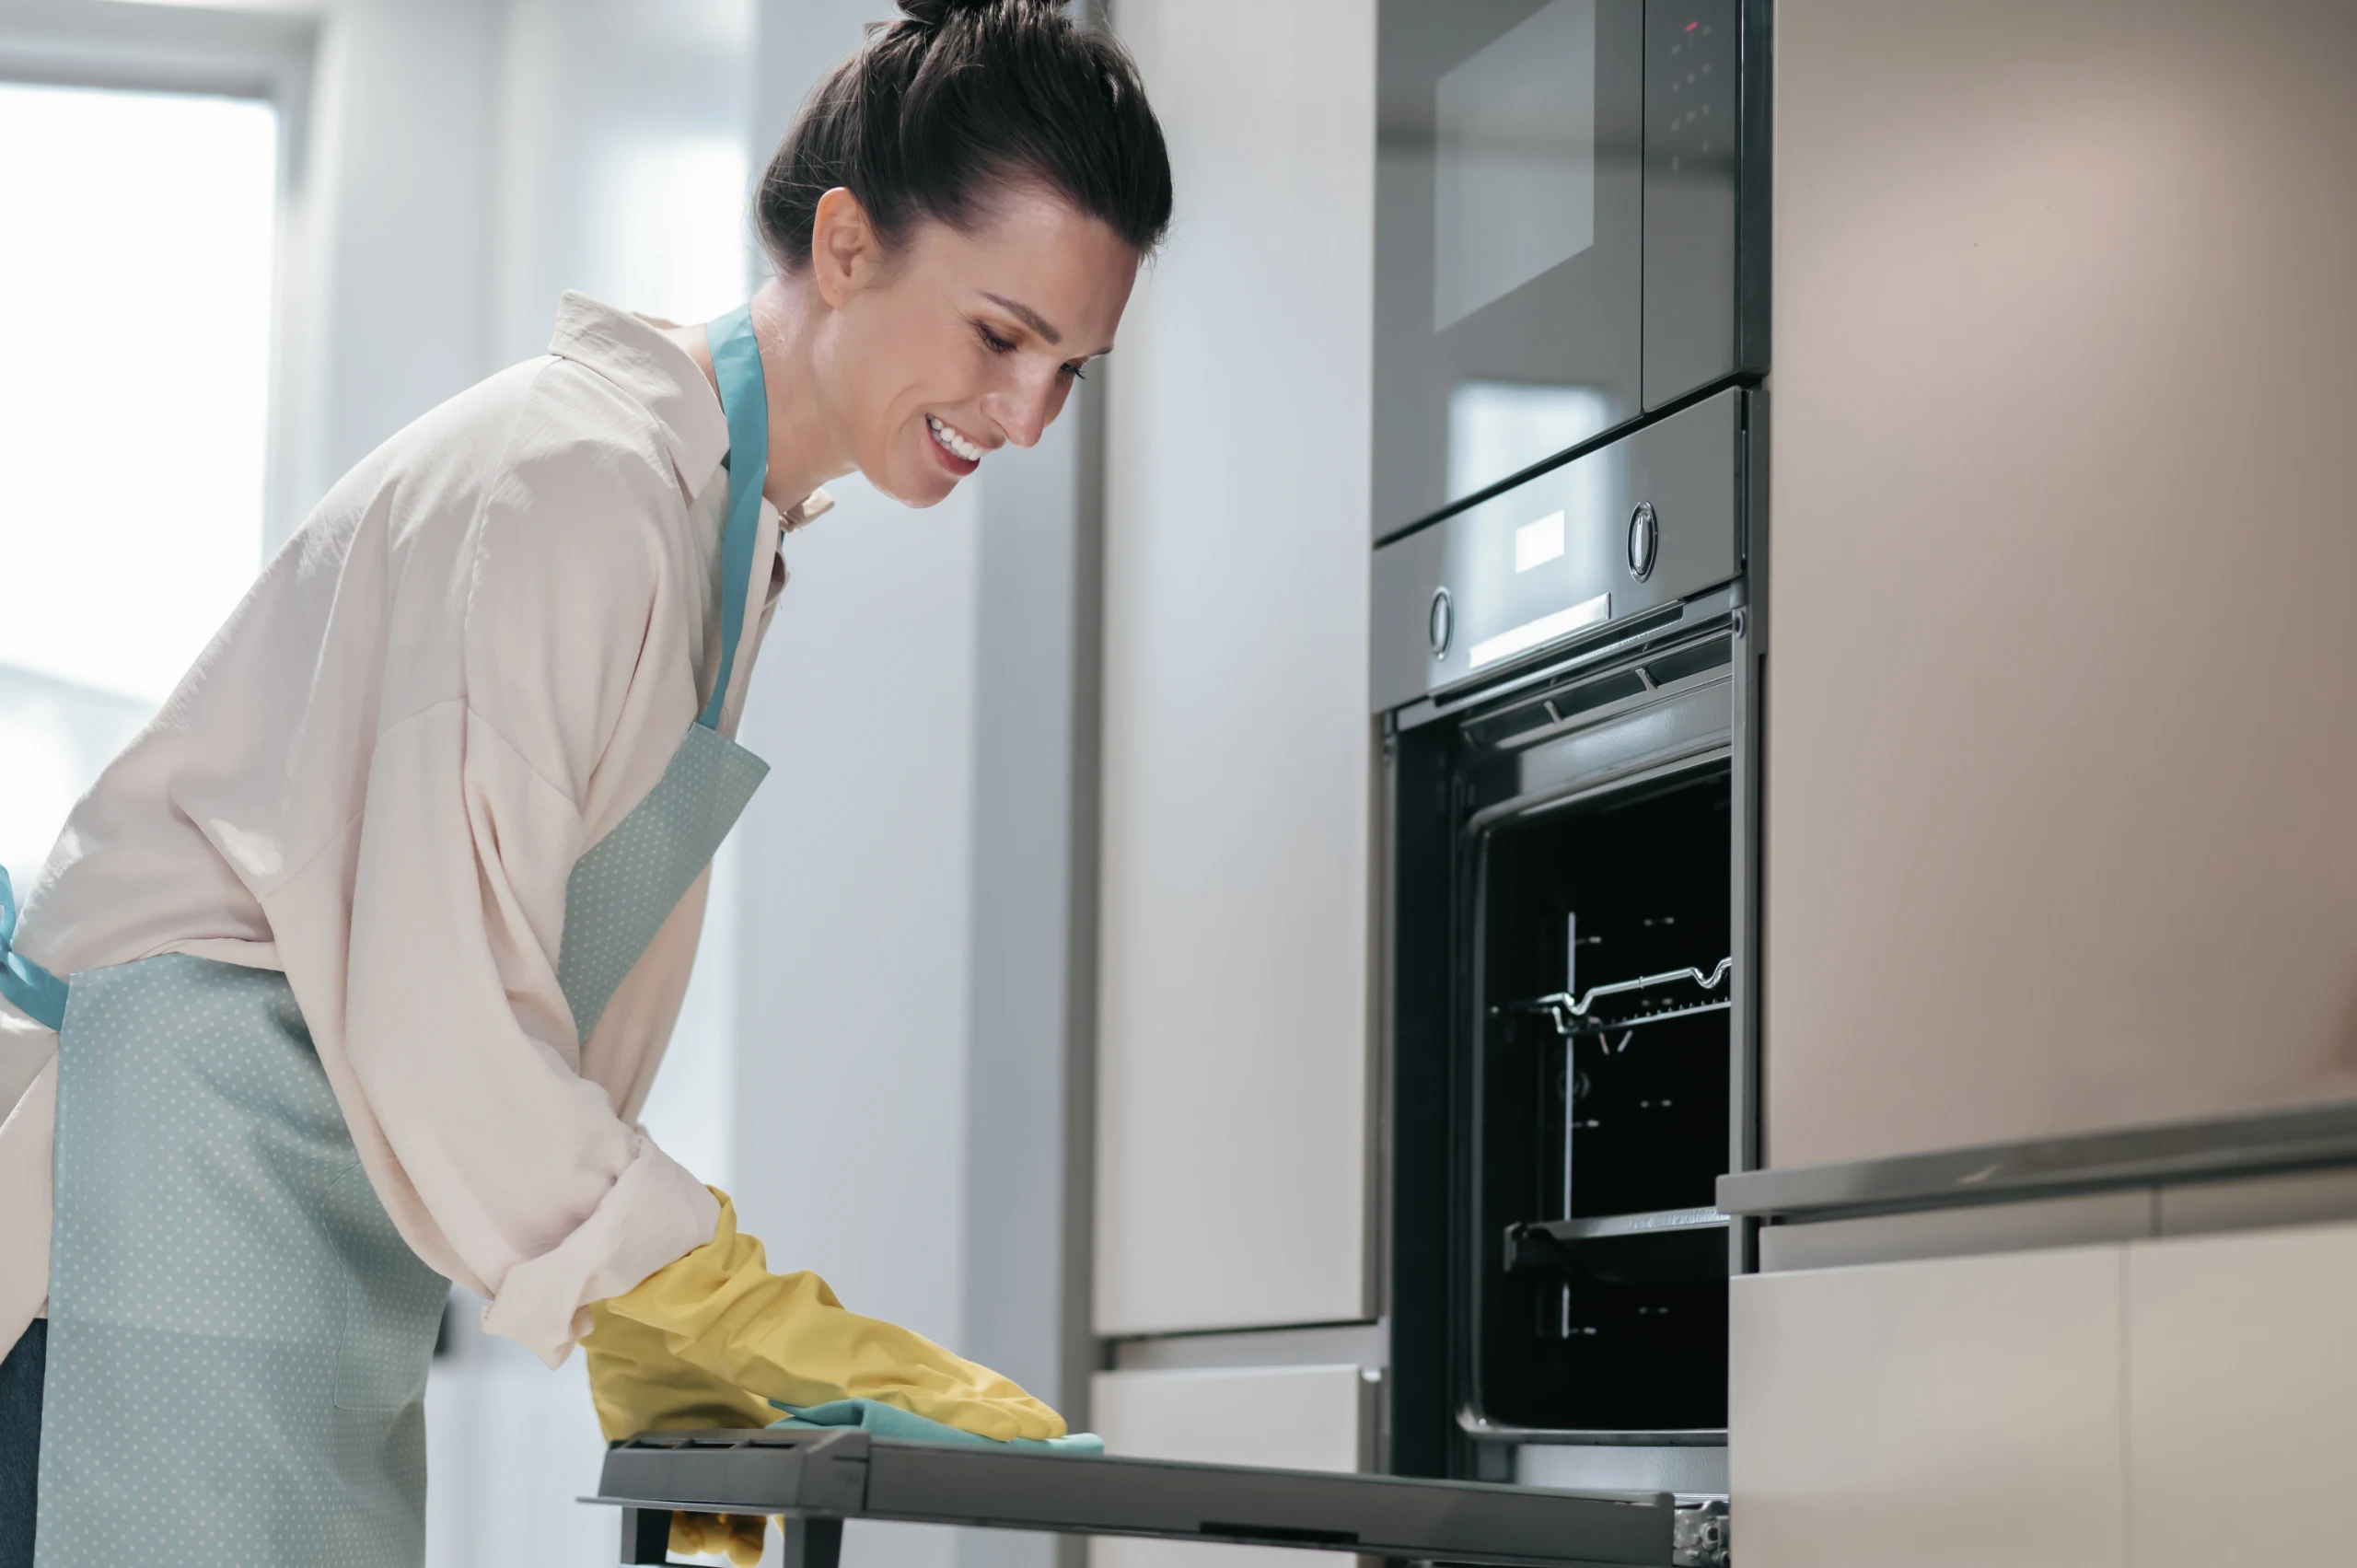 Self-Cleaning Ovens: Are They Worth the Investment?